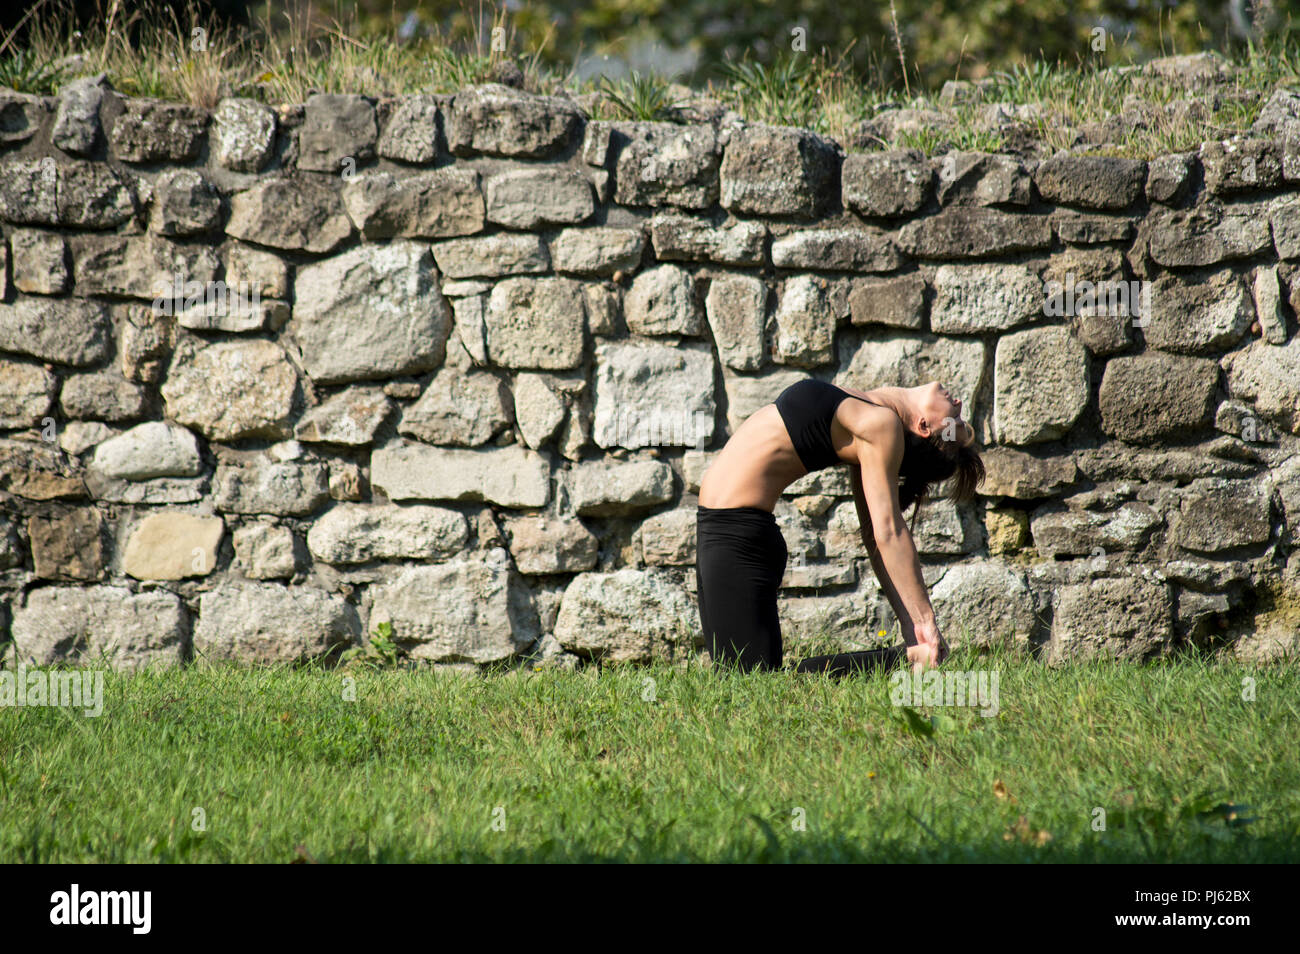 Woman practicing yoga outdoors, in Camel pose. Stock Photo